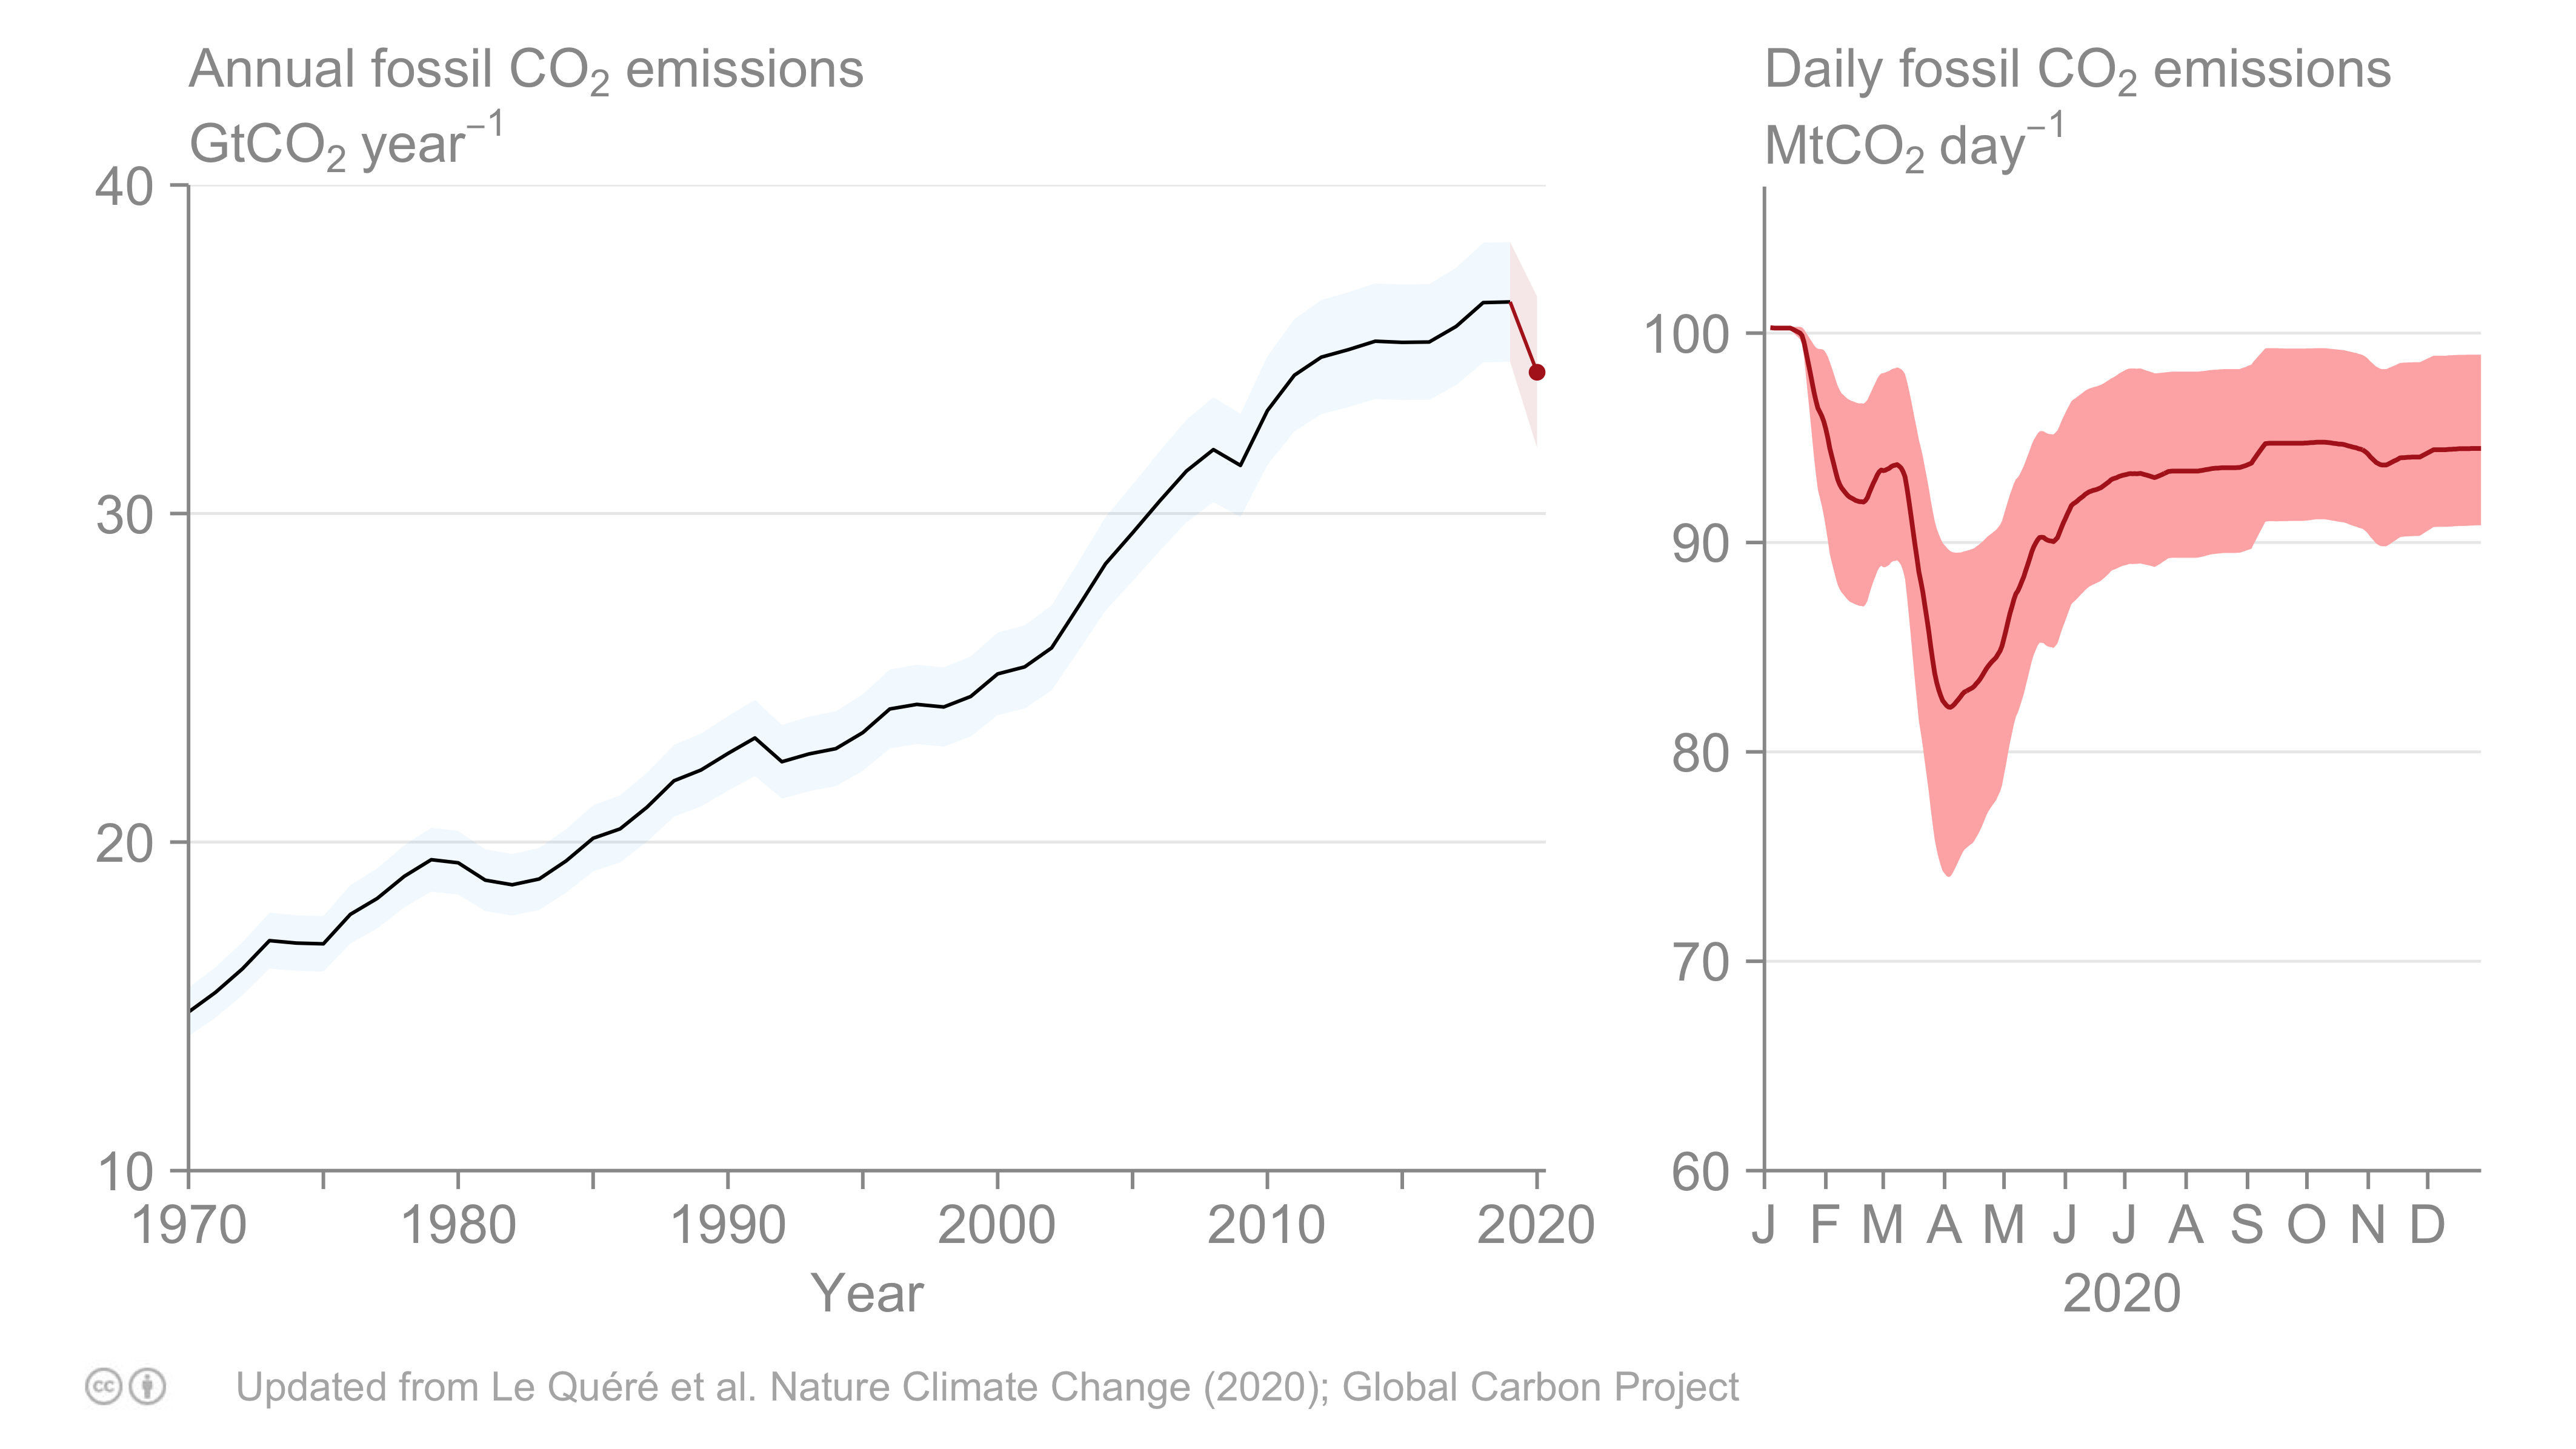 Global fossil CO2 emissions (MtCO2 year−1). a) Annual emissions in the period 1970–2019 (black line), updated in the Global Carbon Project 2020 (Friedlingstein et al., 2020; ±1σ; grey shading). The red dot shows 2020 emissions as estimated in this update of Le Quéré et al. (2020). b) Daily CO2 emissions during 2020 (red line) based on the CI and corresponding change in activity for each CI. (see paper for further details)